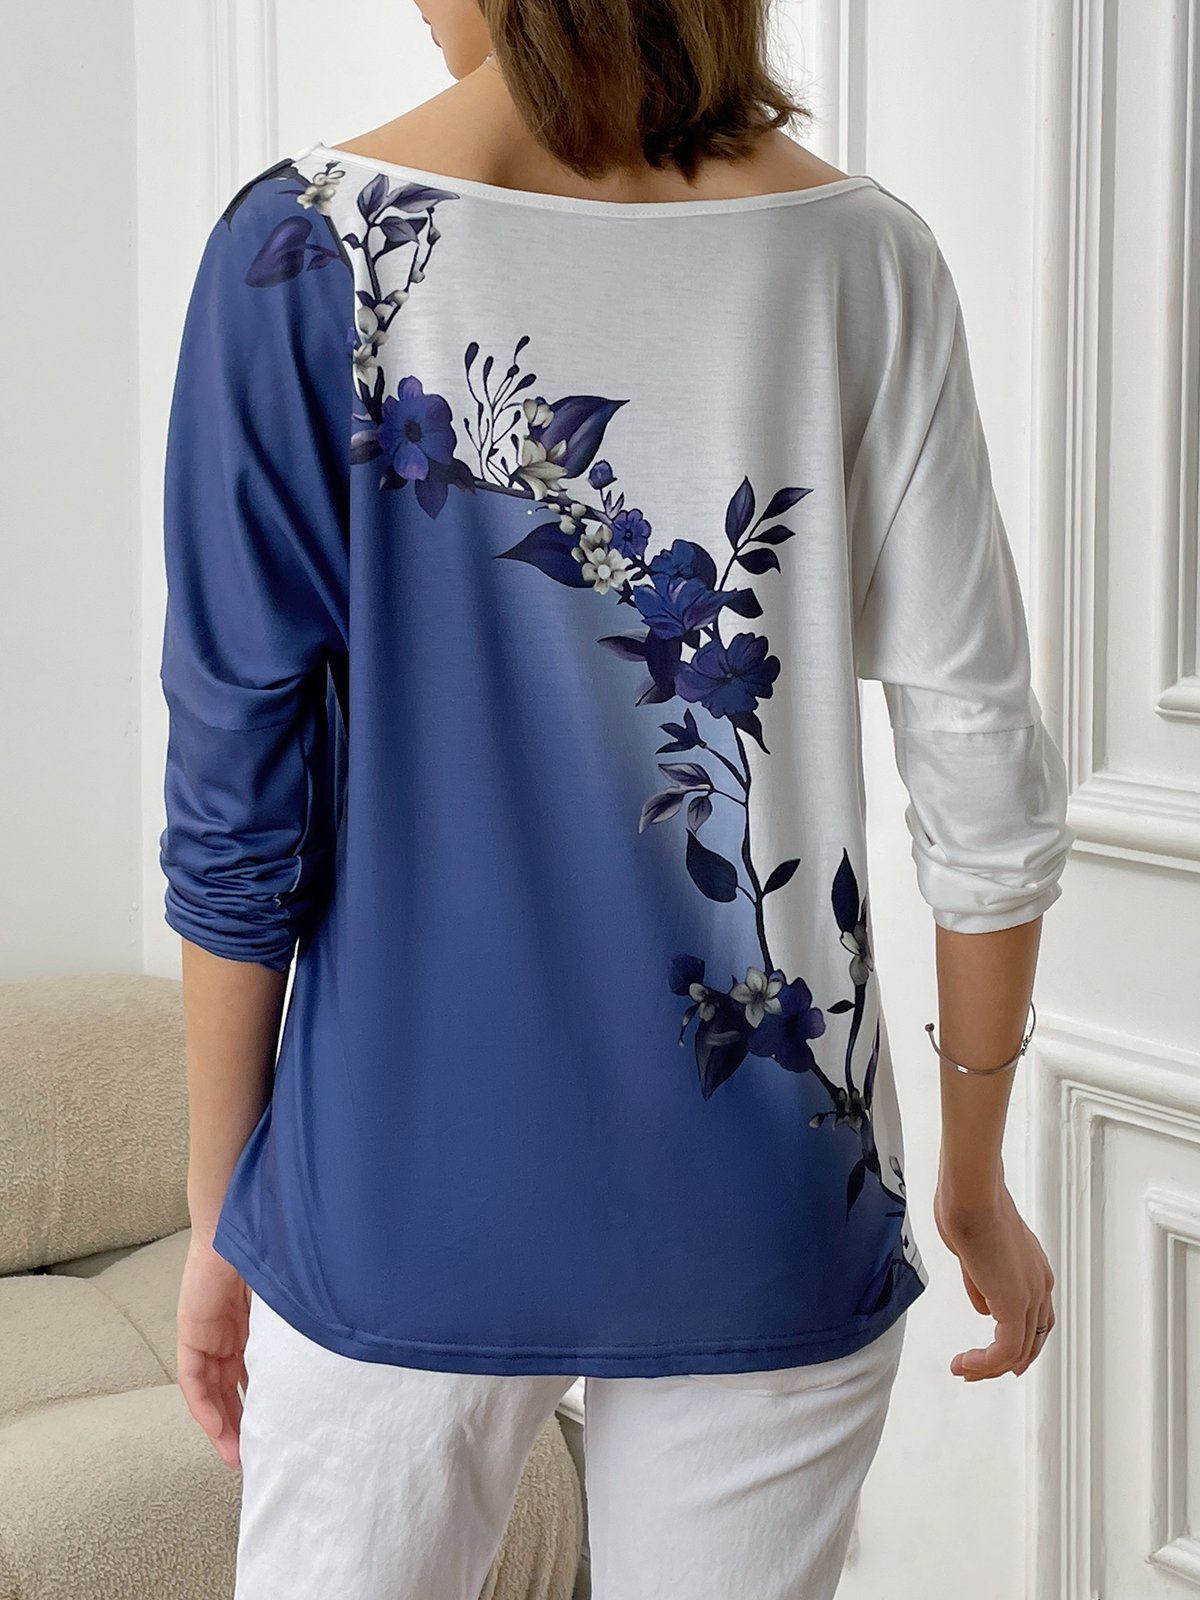 Contrast Floral Design Long Sleeve T-Shirt | justfashionnow